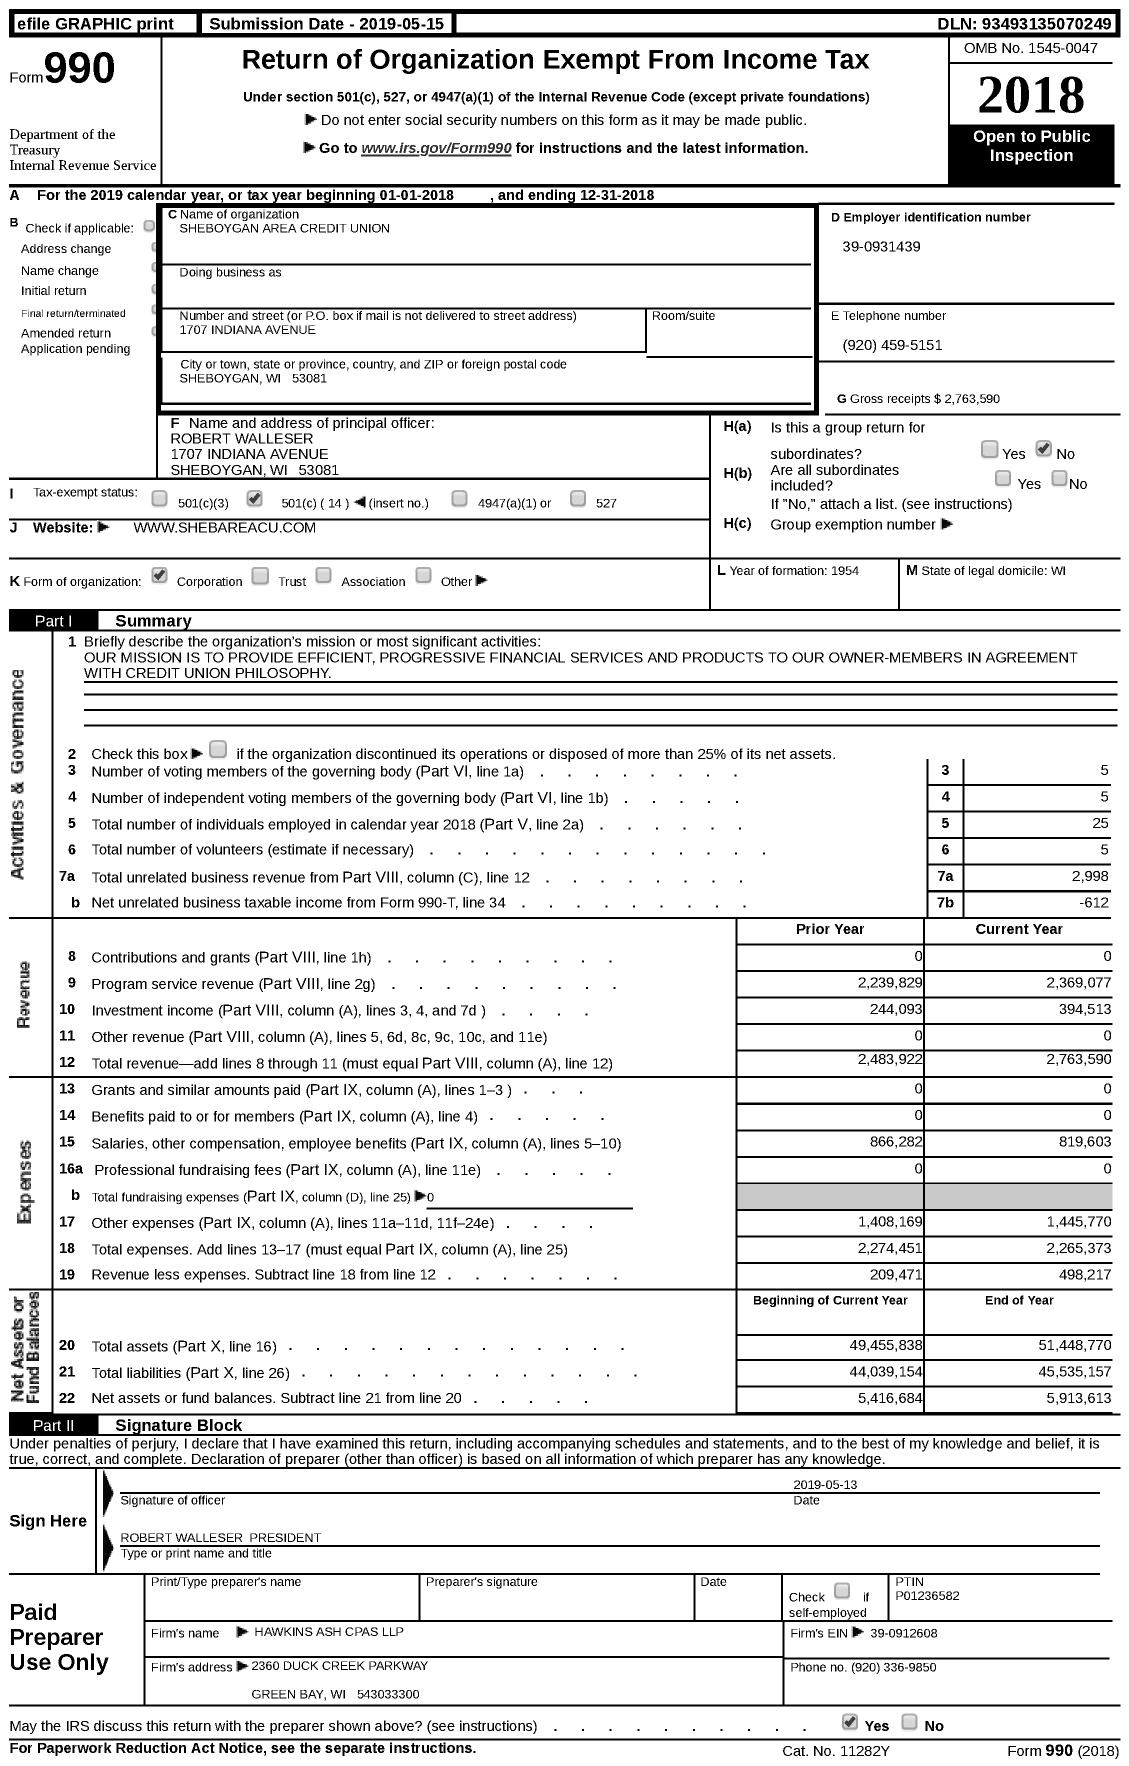 Image of first page of 2018 Form 990 for Sheboygan Area Credit Union